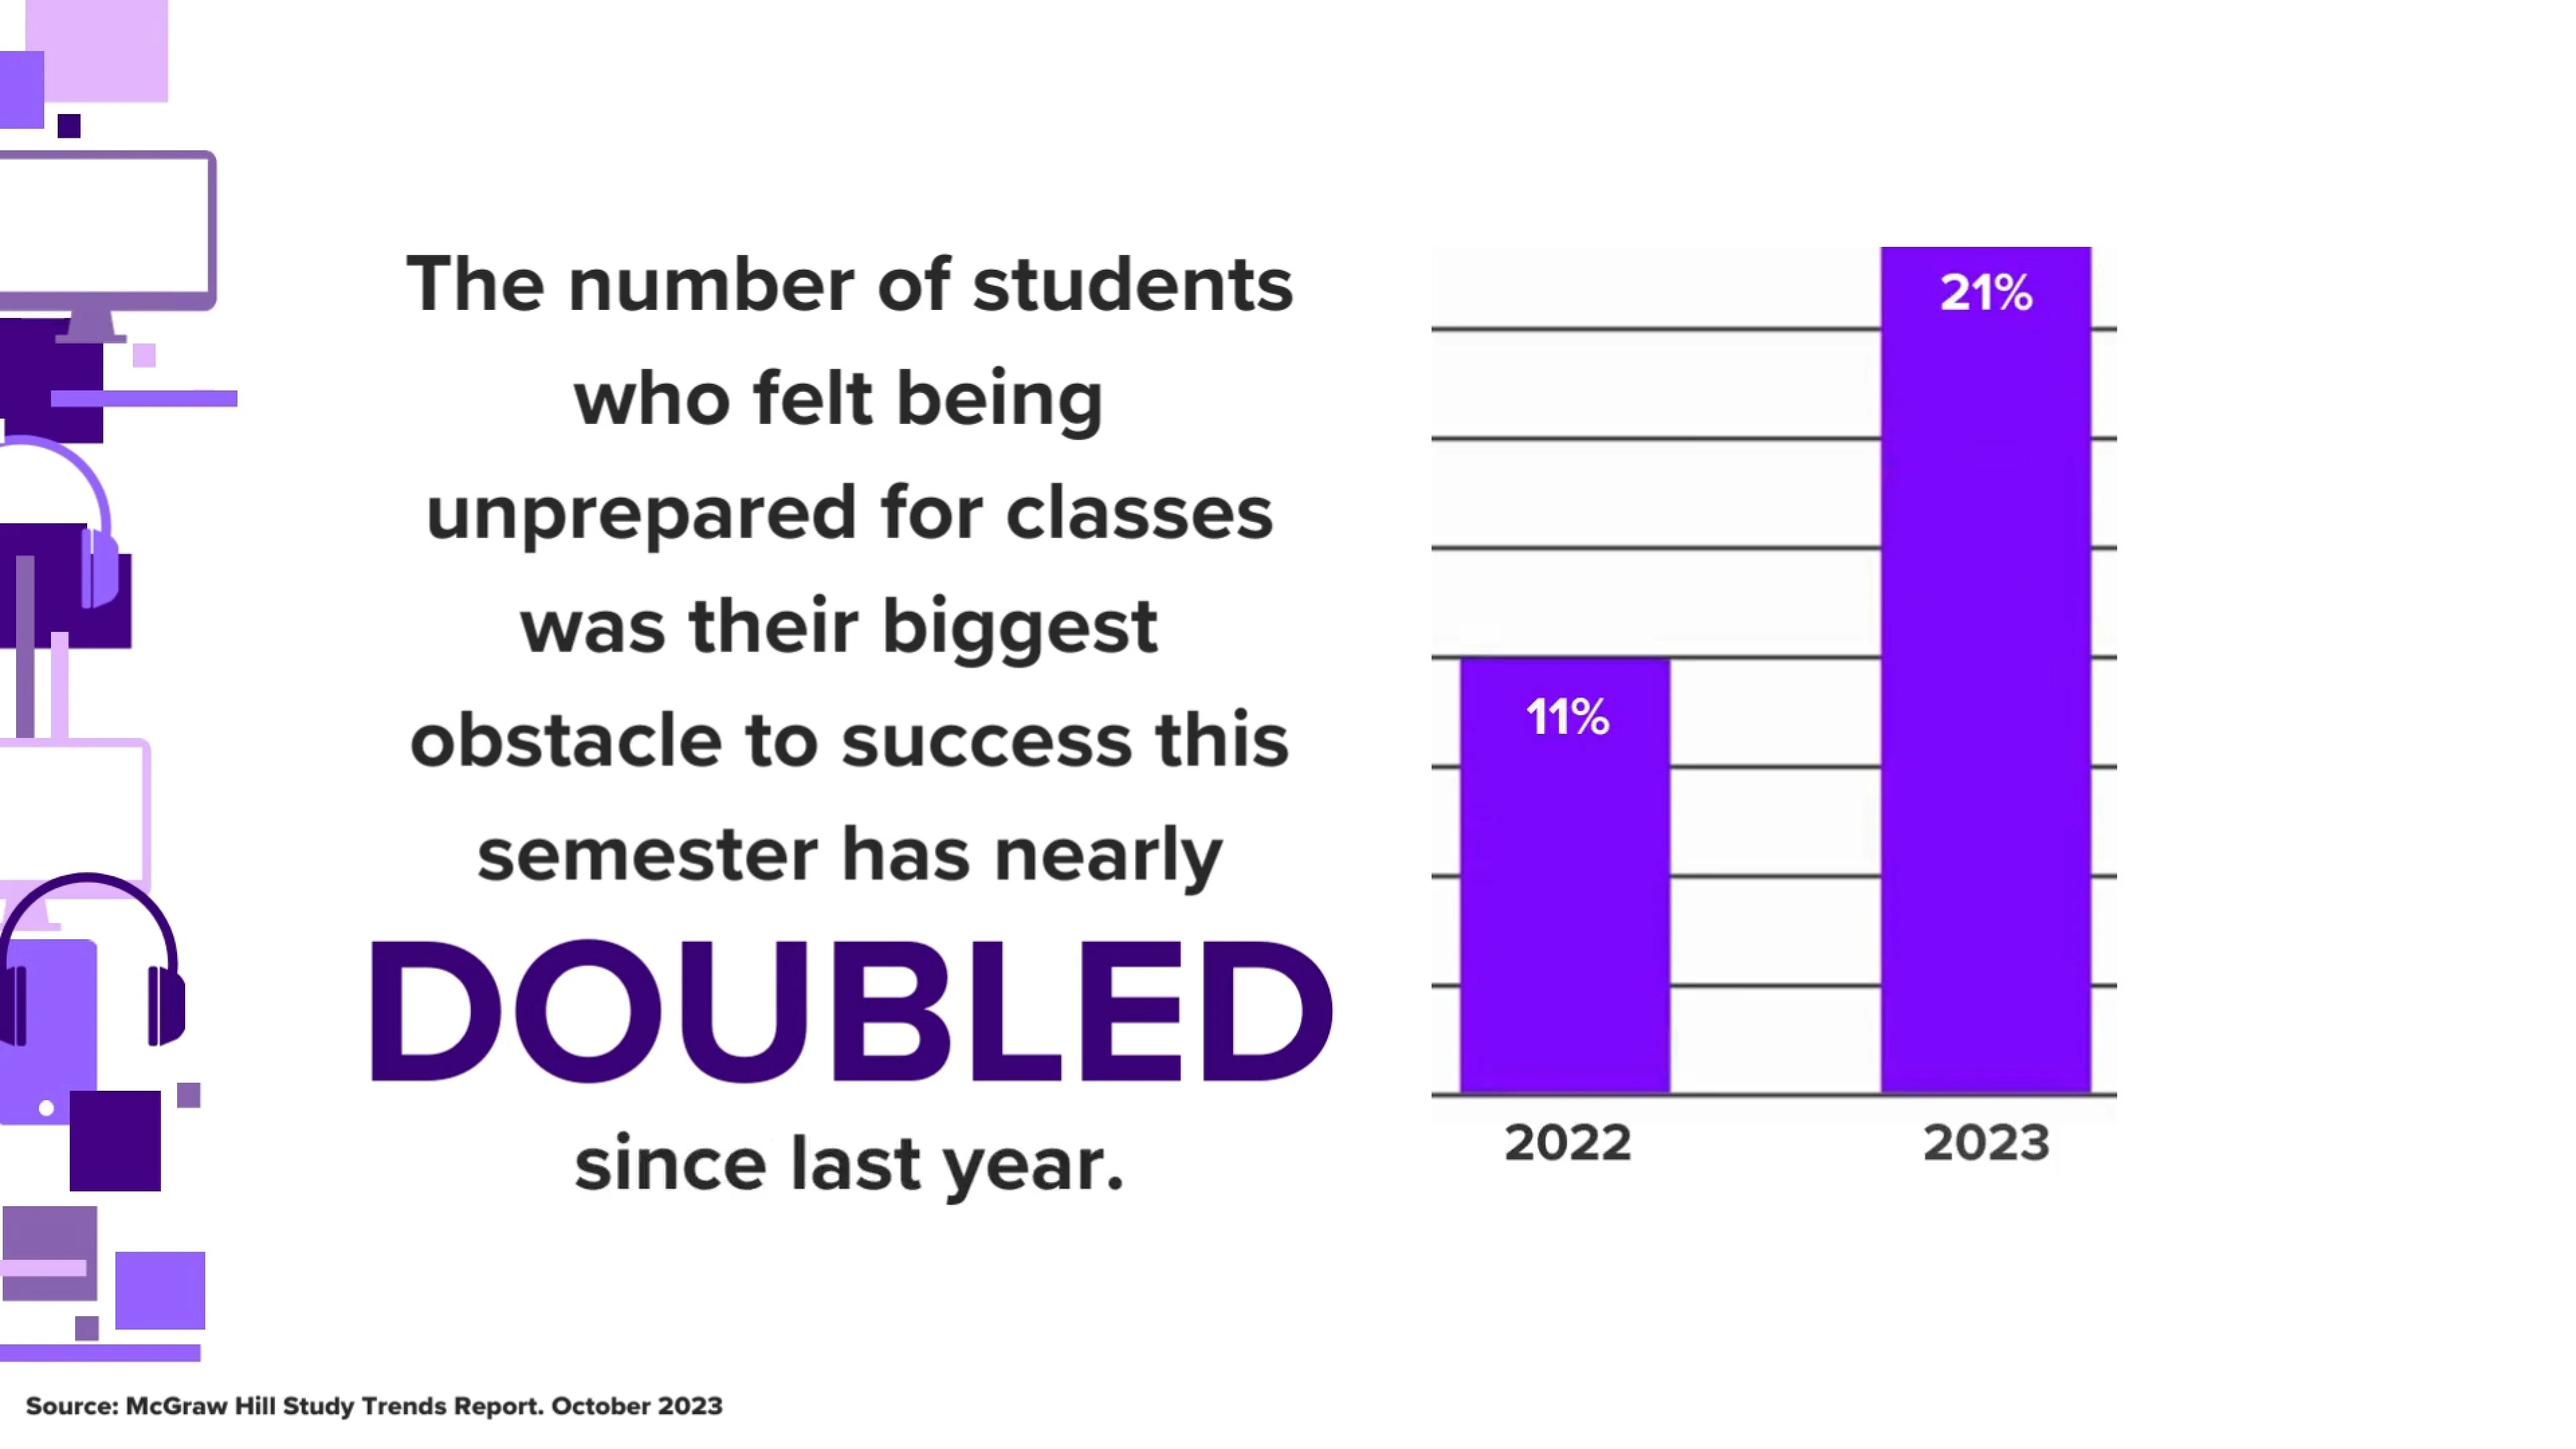 The number of students who felt being unprepared for classes was their biggest obstacle to success this semester has nearly doubled since last year.